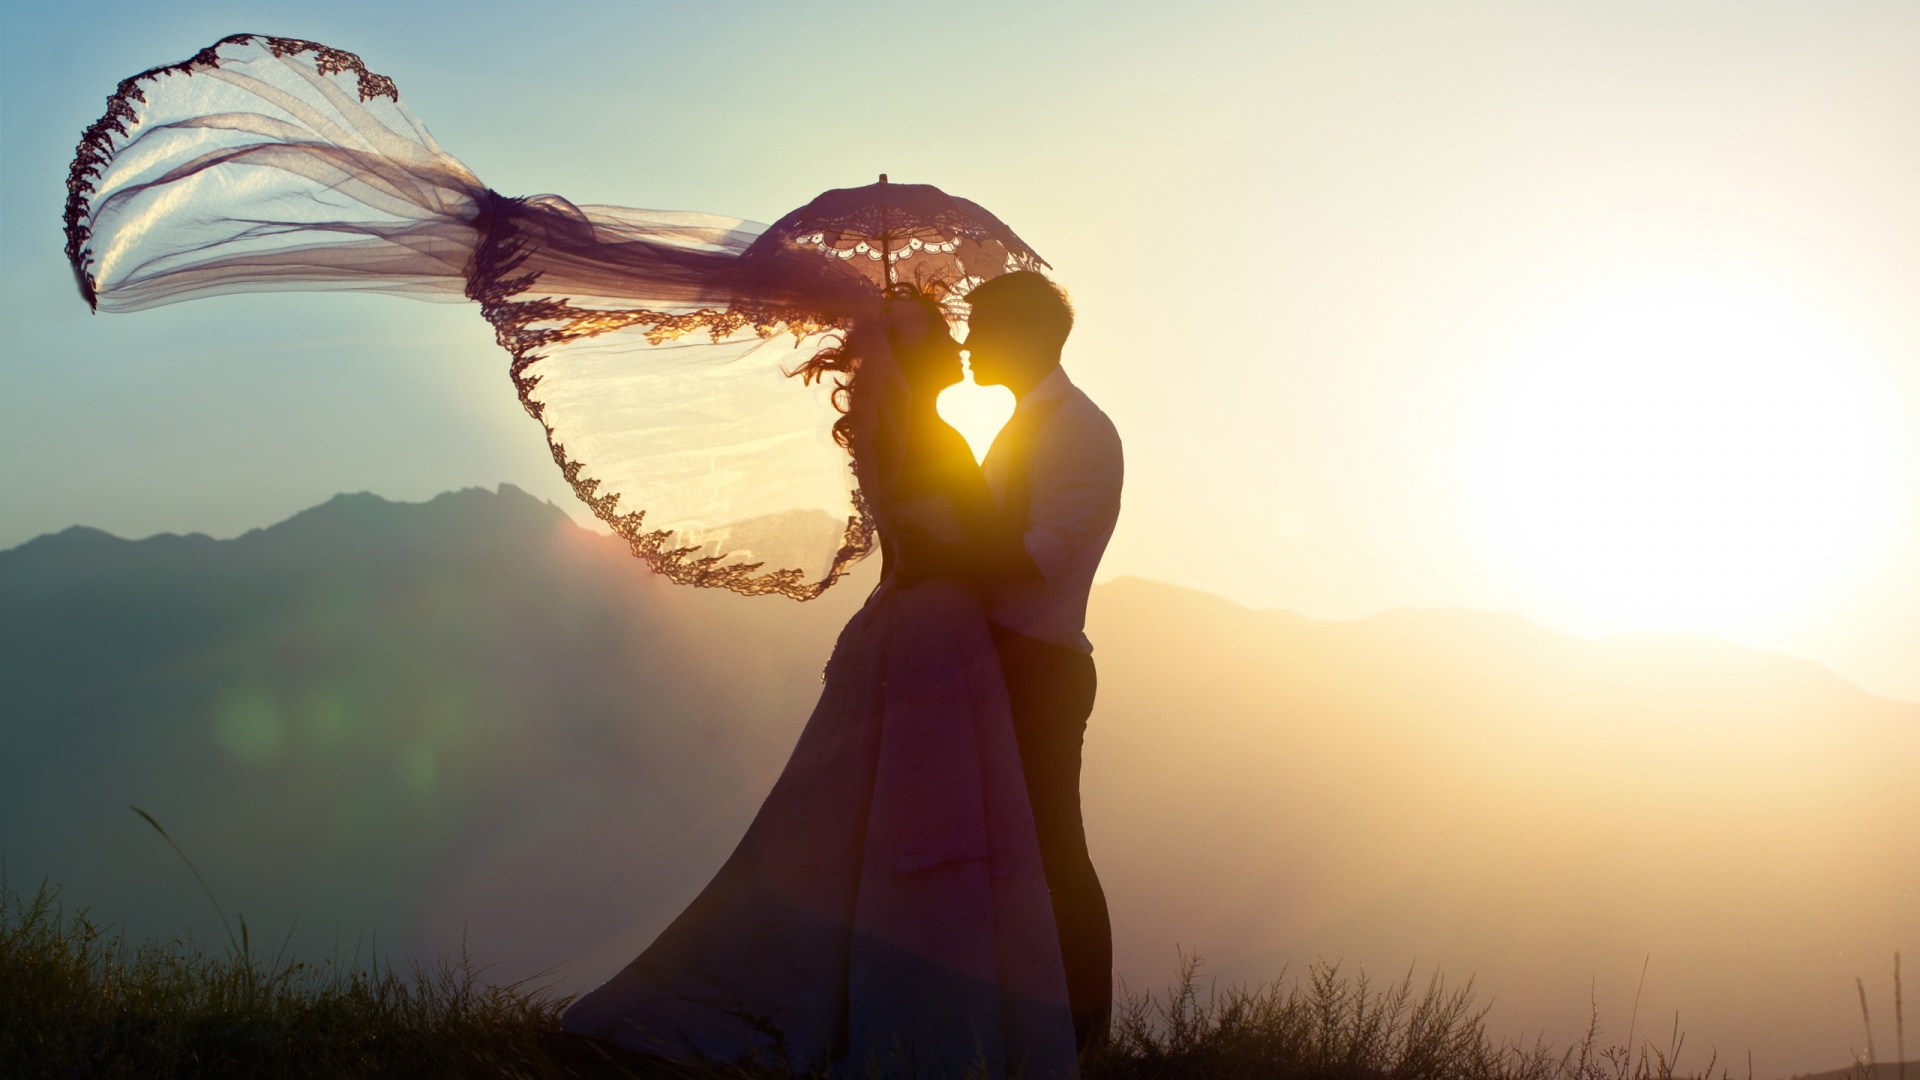 Most Beautiful Photographs of Romantic Couples !! Love and Romance ...